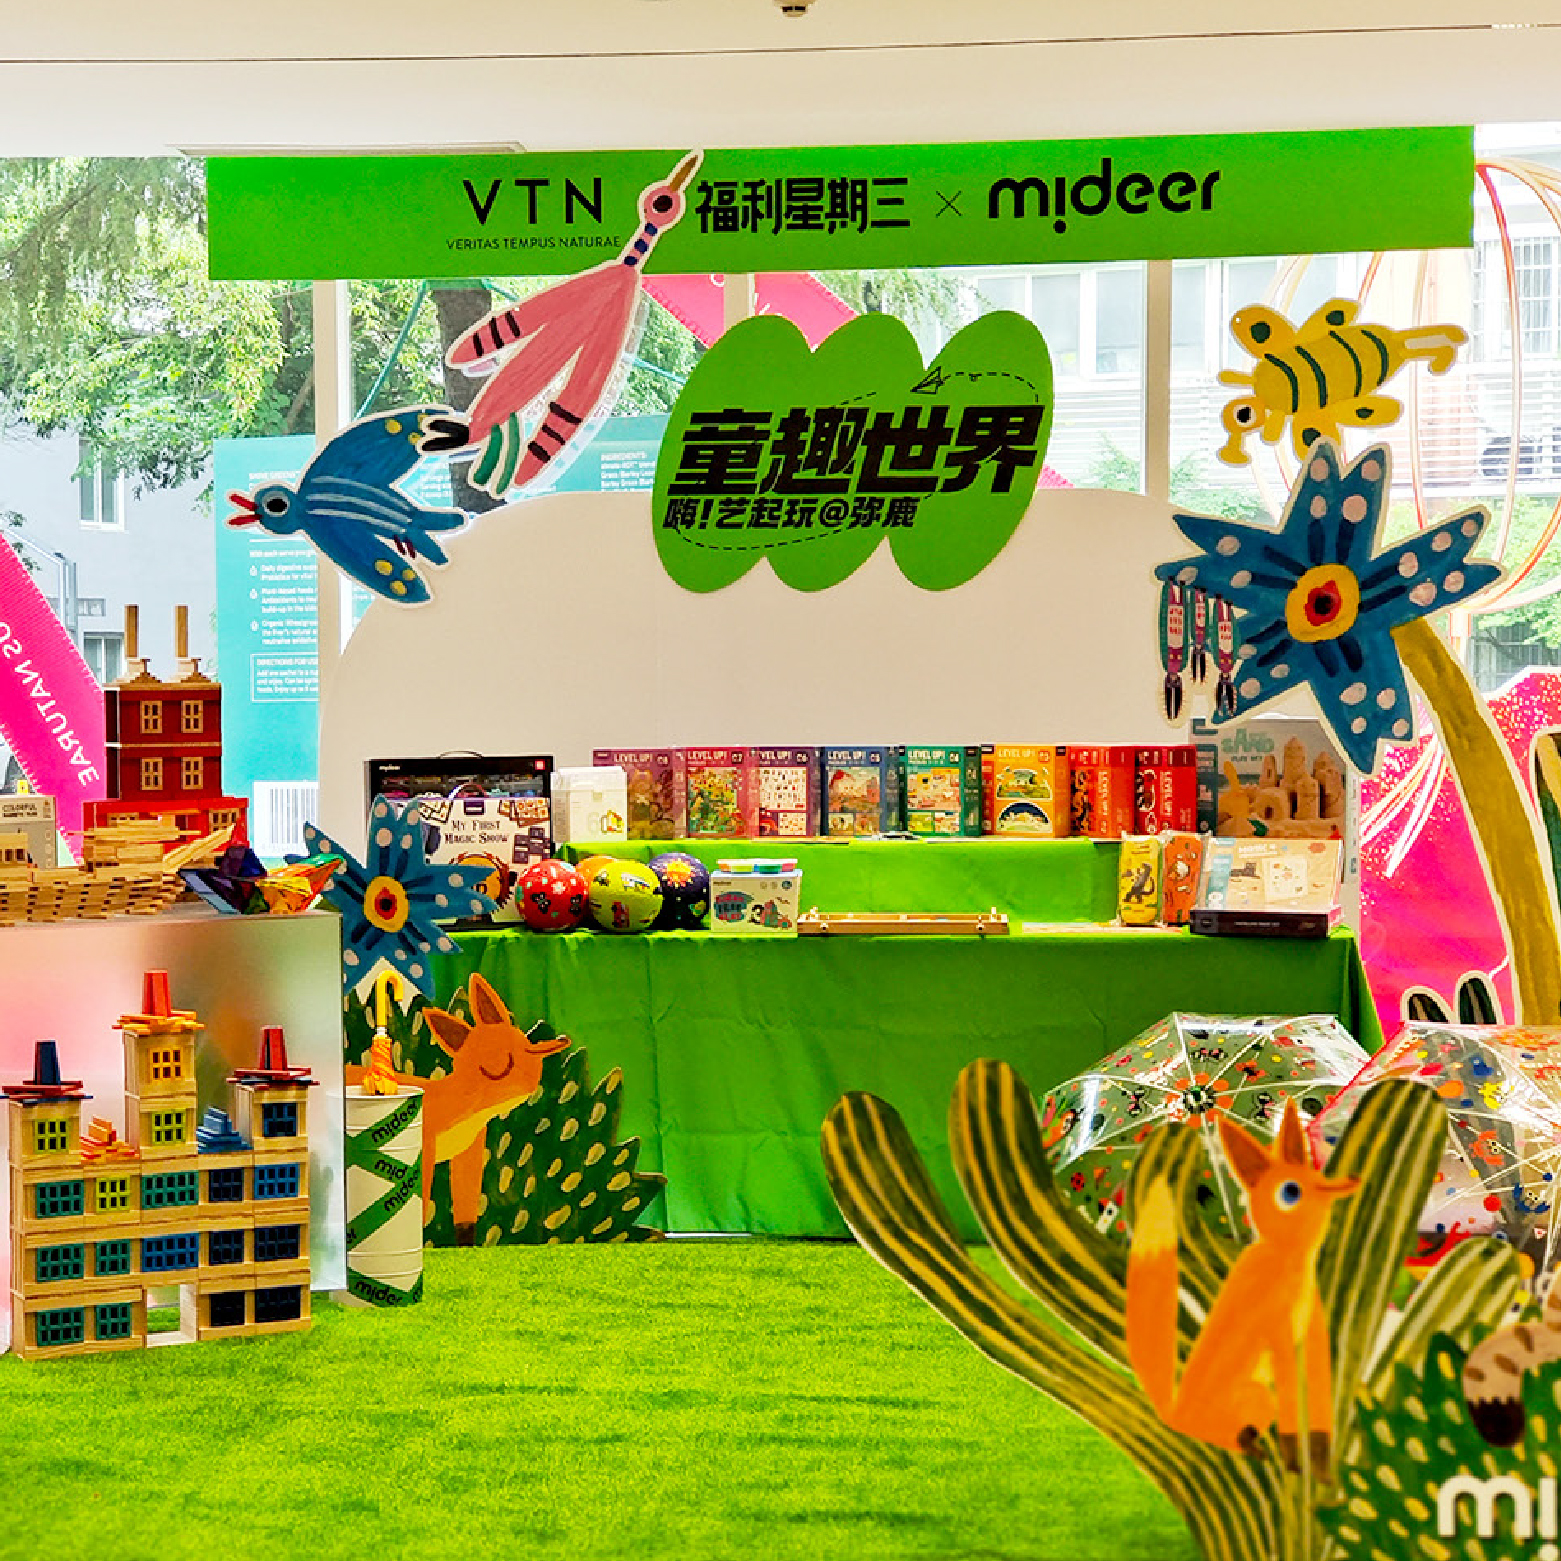 mideer, a toy brand of Art & Education, has been selling well in